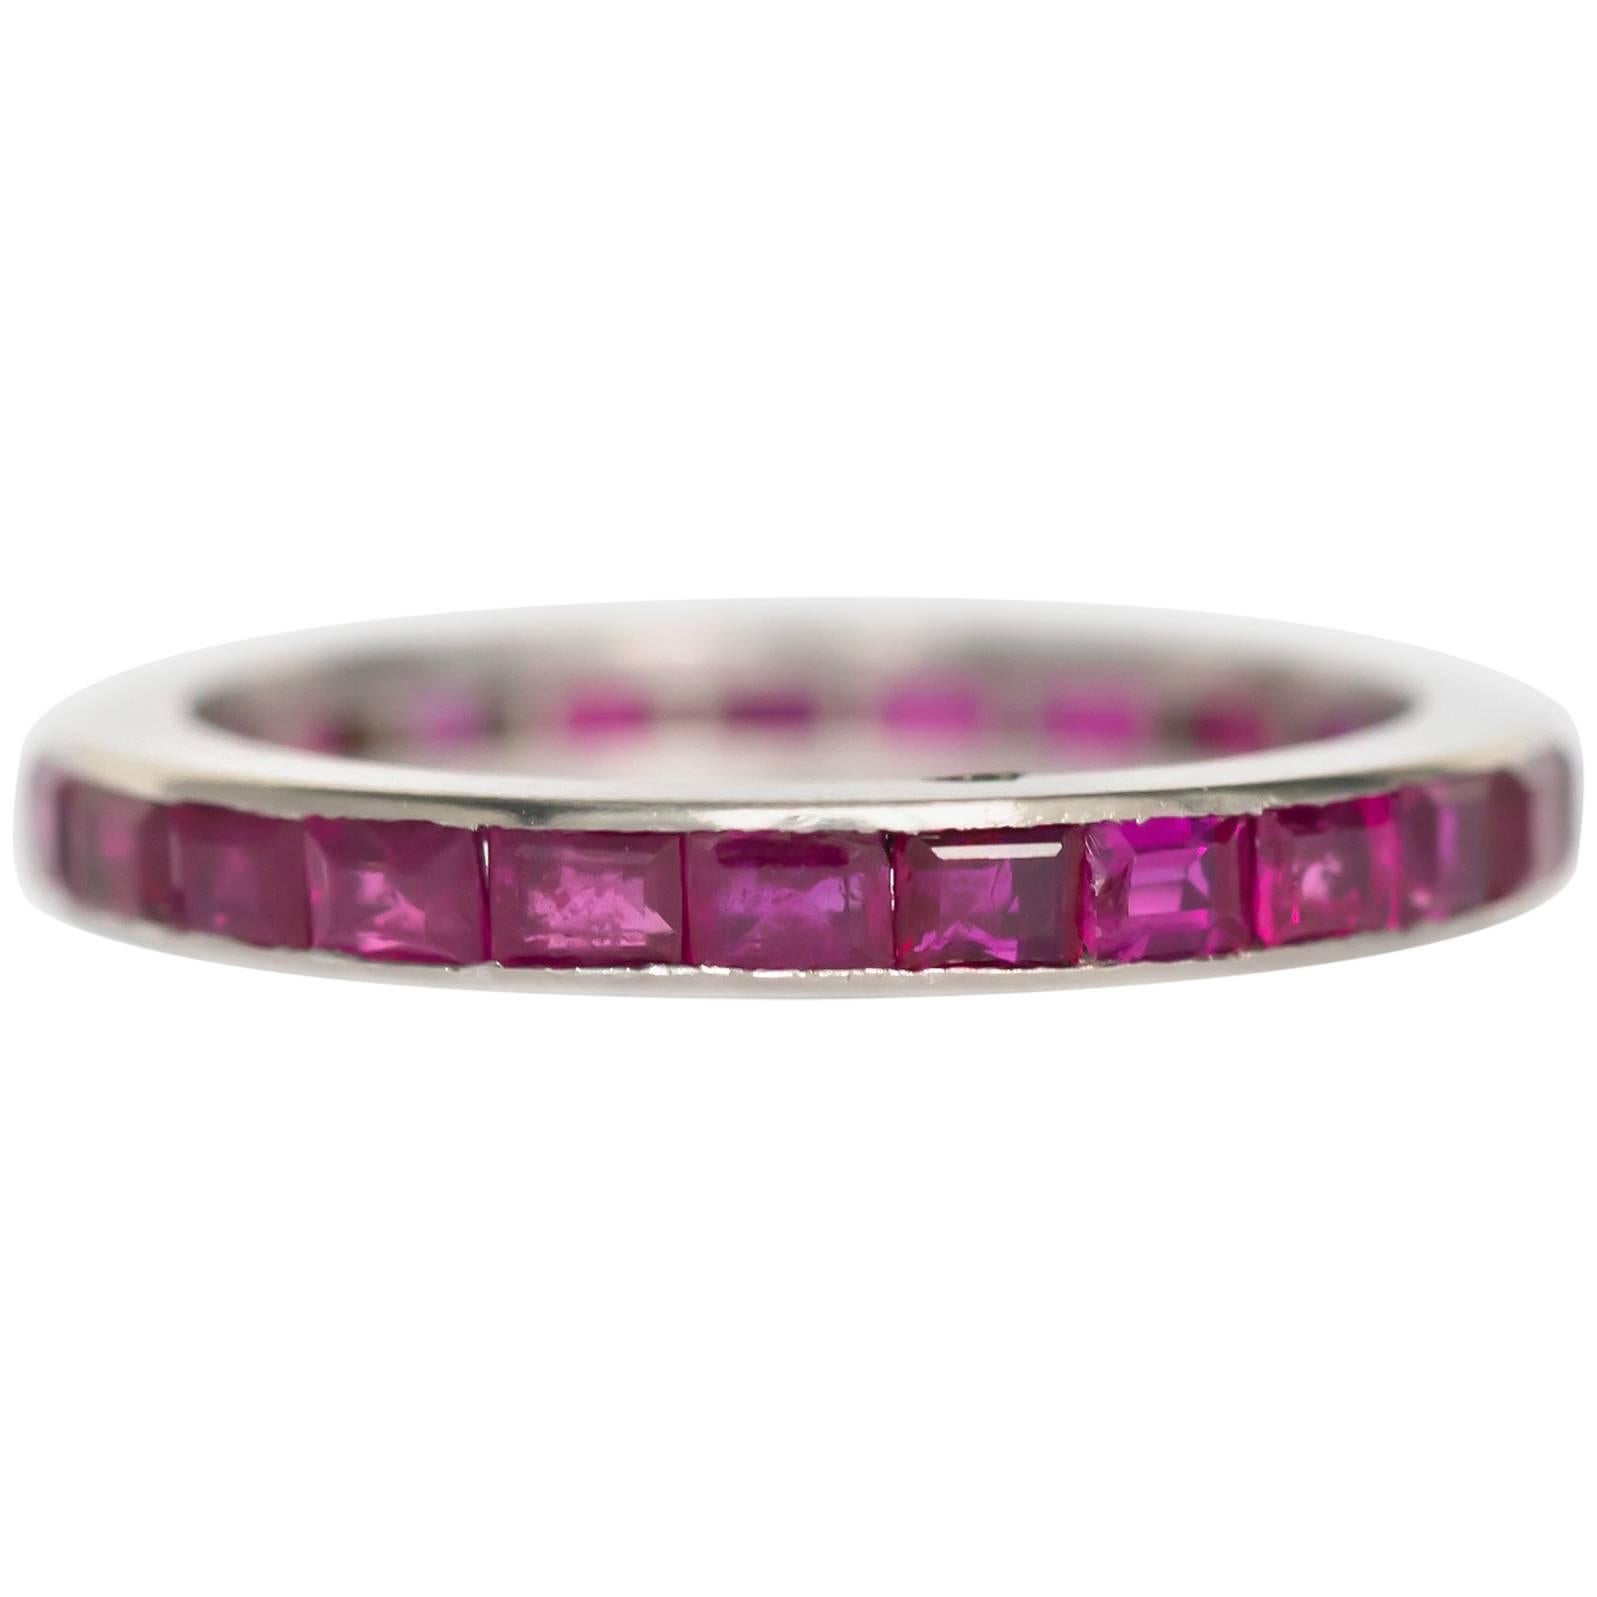 1940s Art Deco 1.50 Carat, Total Weight Ruby & 18K White Gold Wedding Band